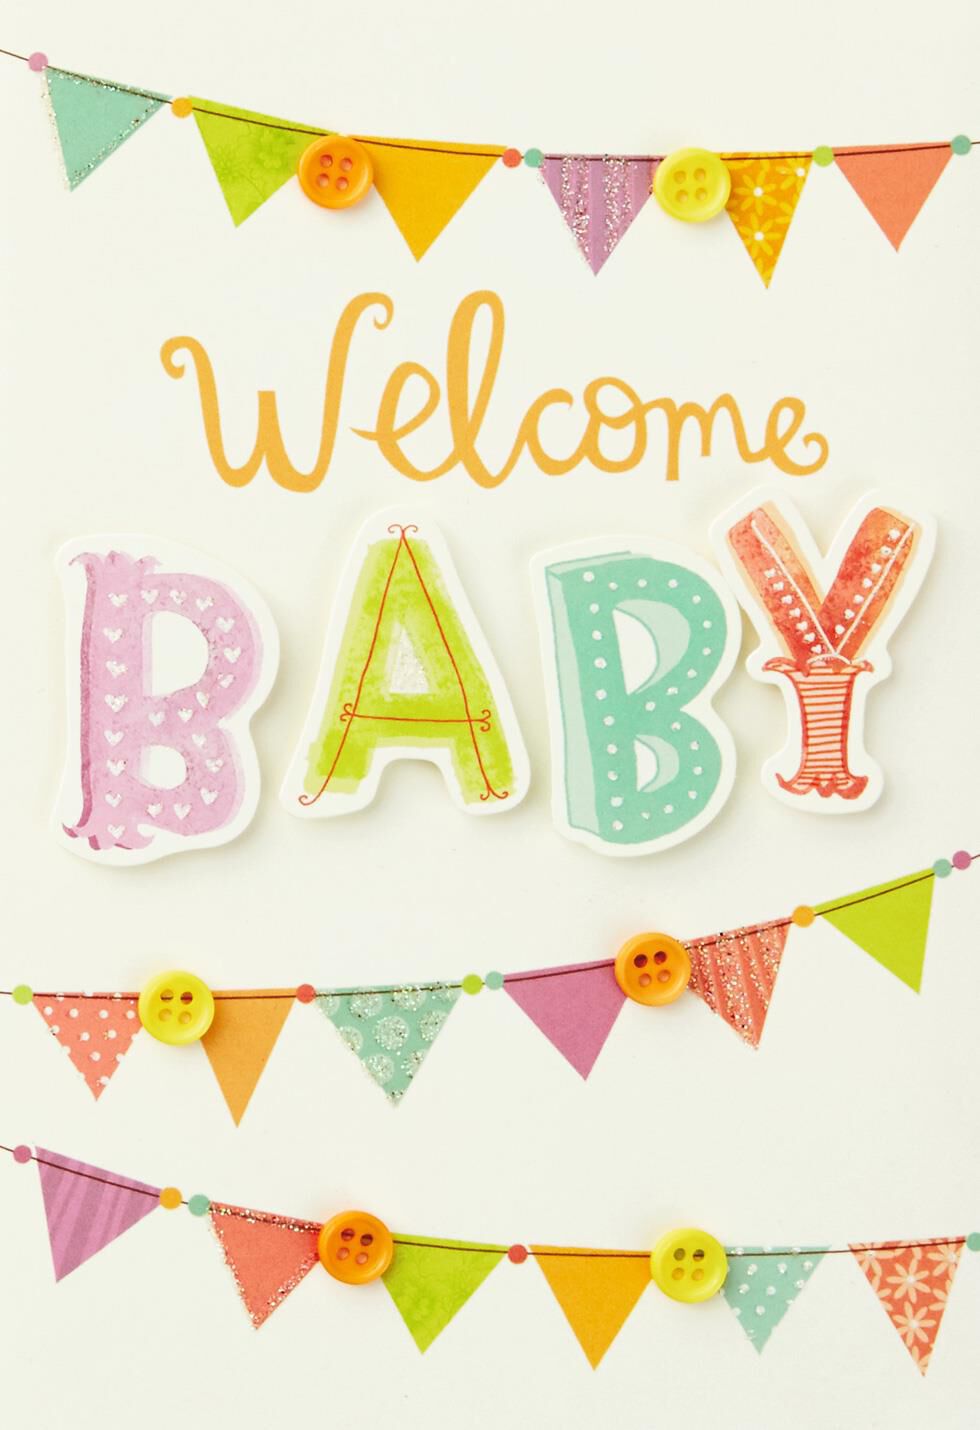 welcome-new-baby-card-greeting-cards-hallmark